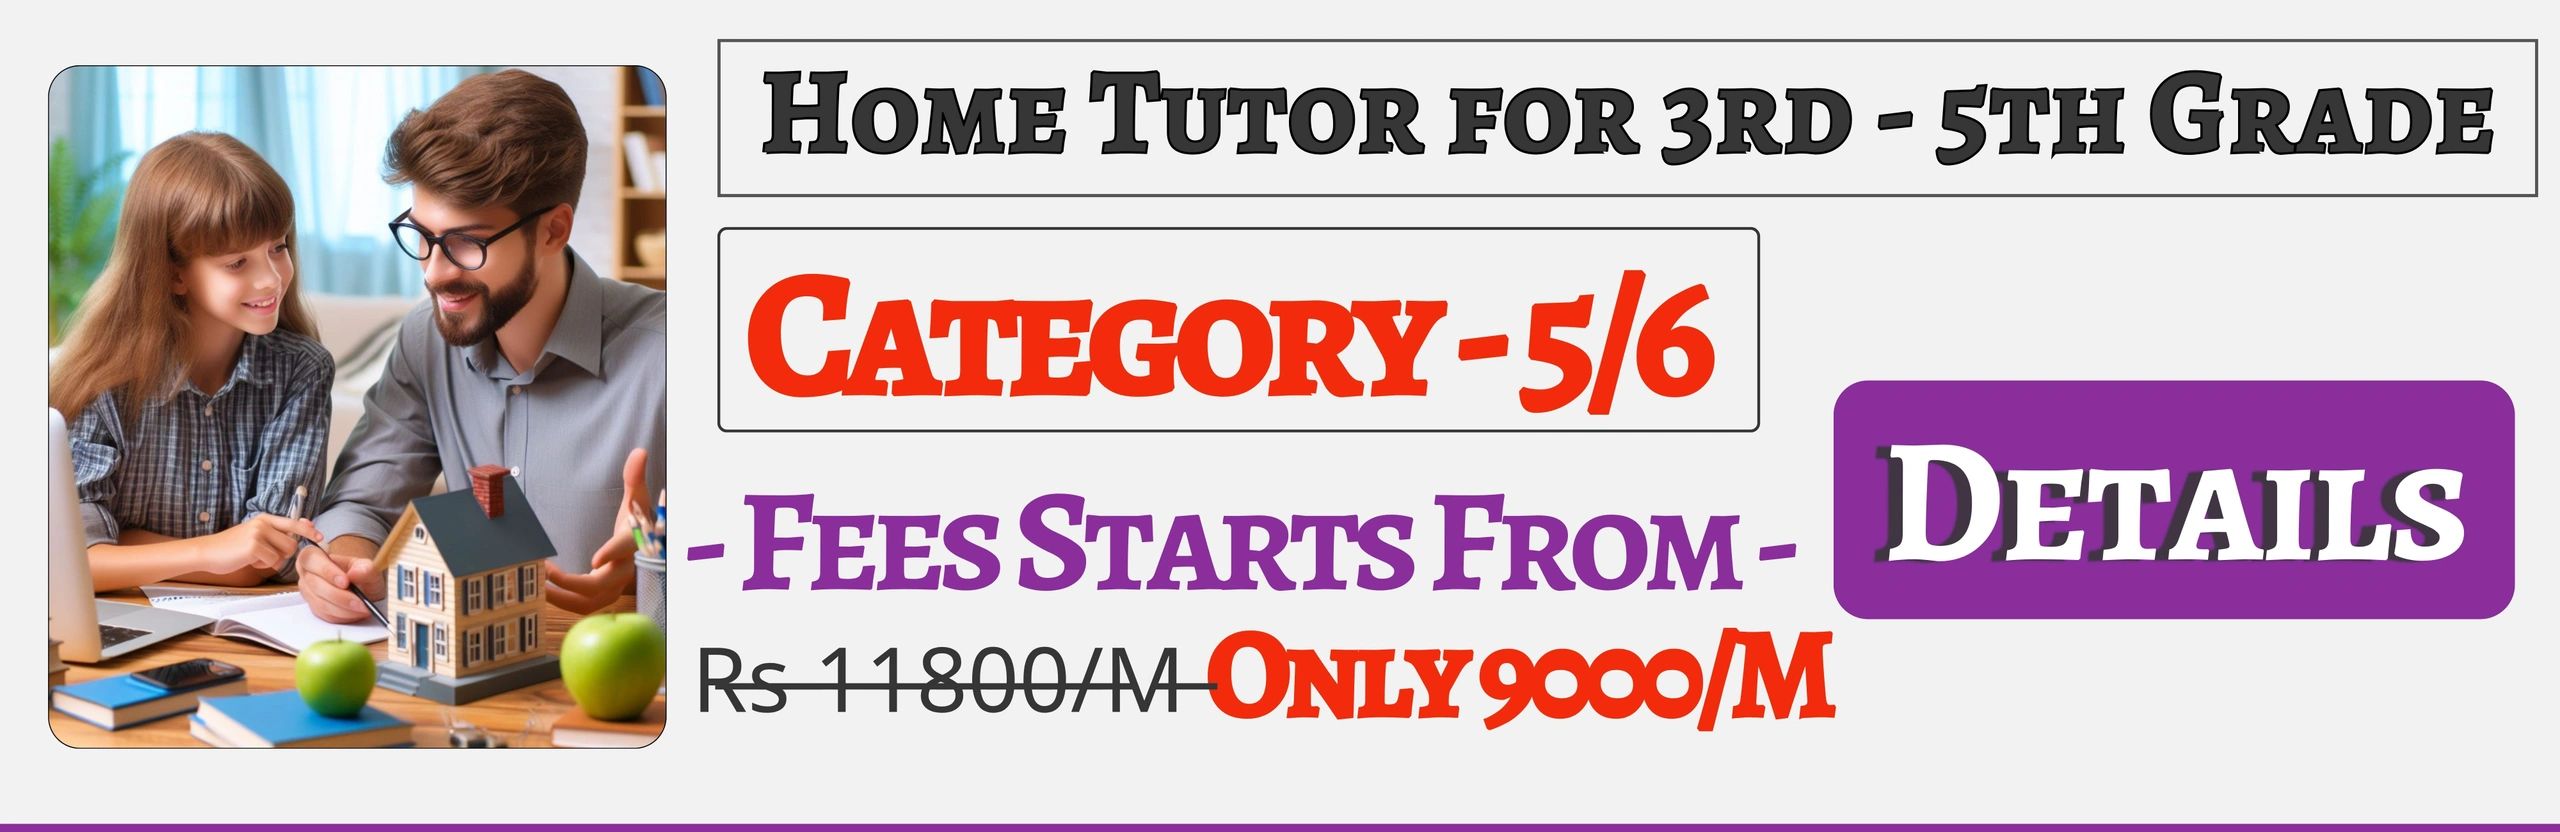 Book Best Home Tuition Tutors For 3rd , 4th & 5th In Jaipur , Fees Only 9000/M